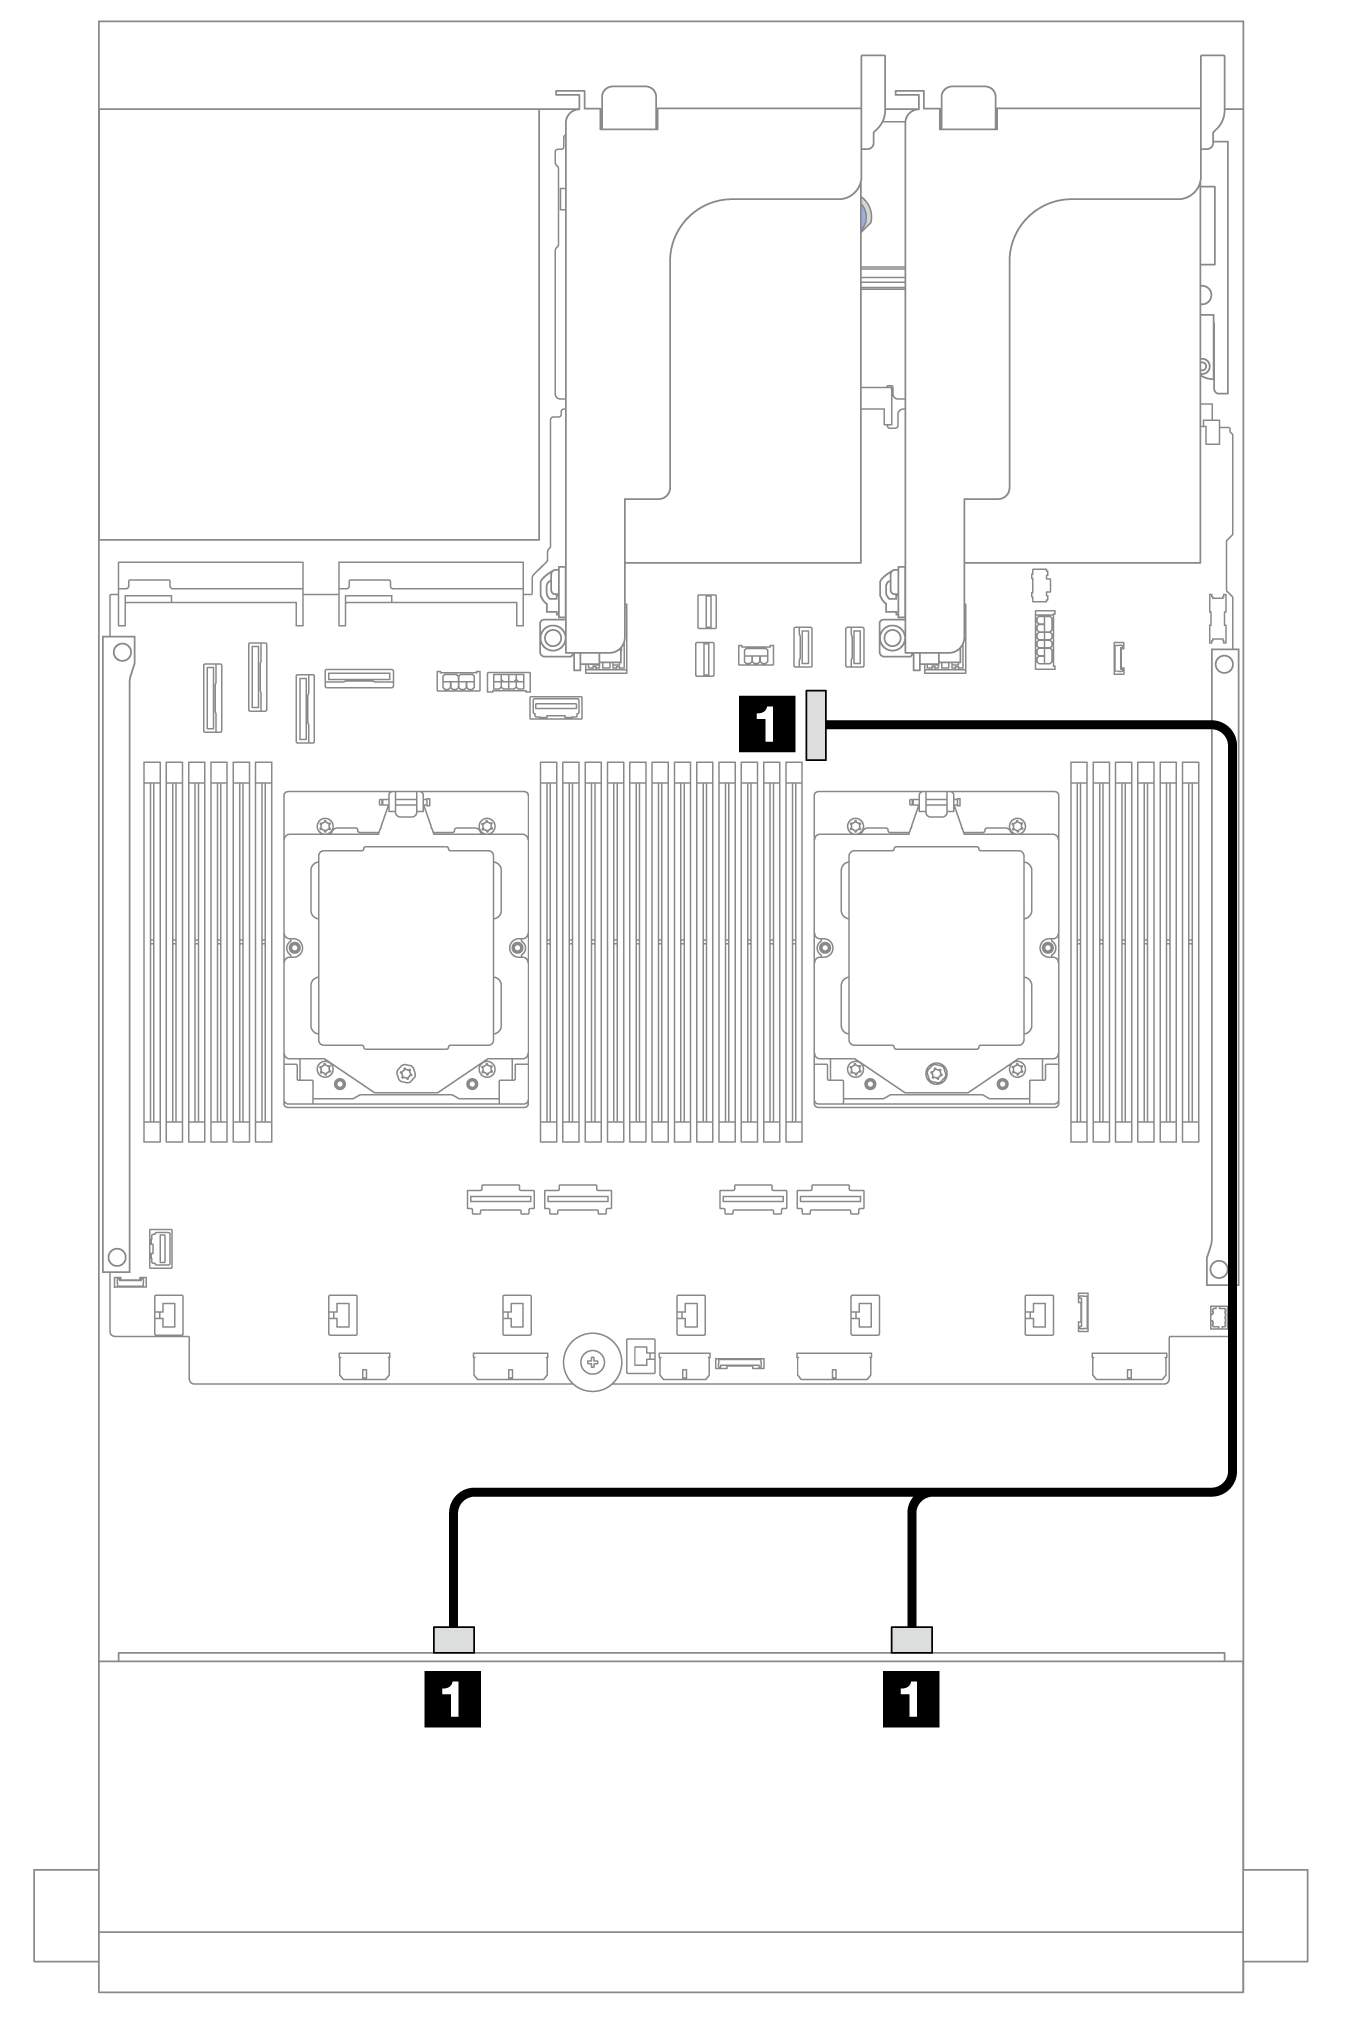 Cable routing to onboard SATA connector